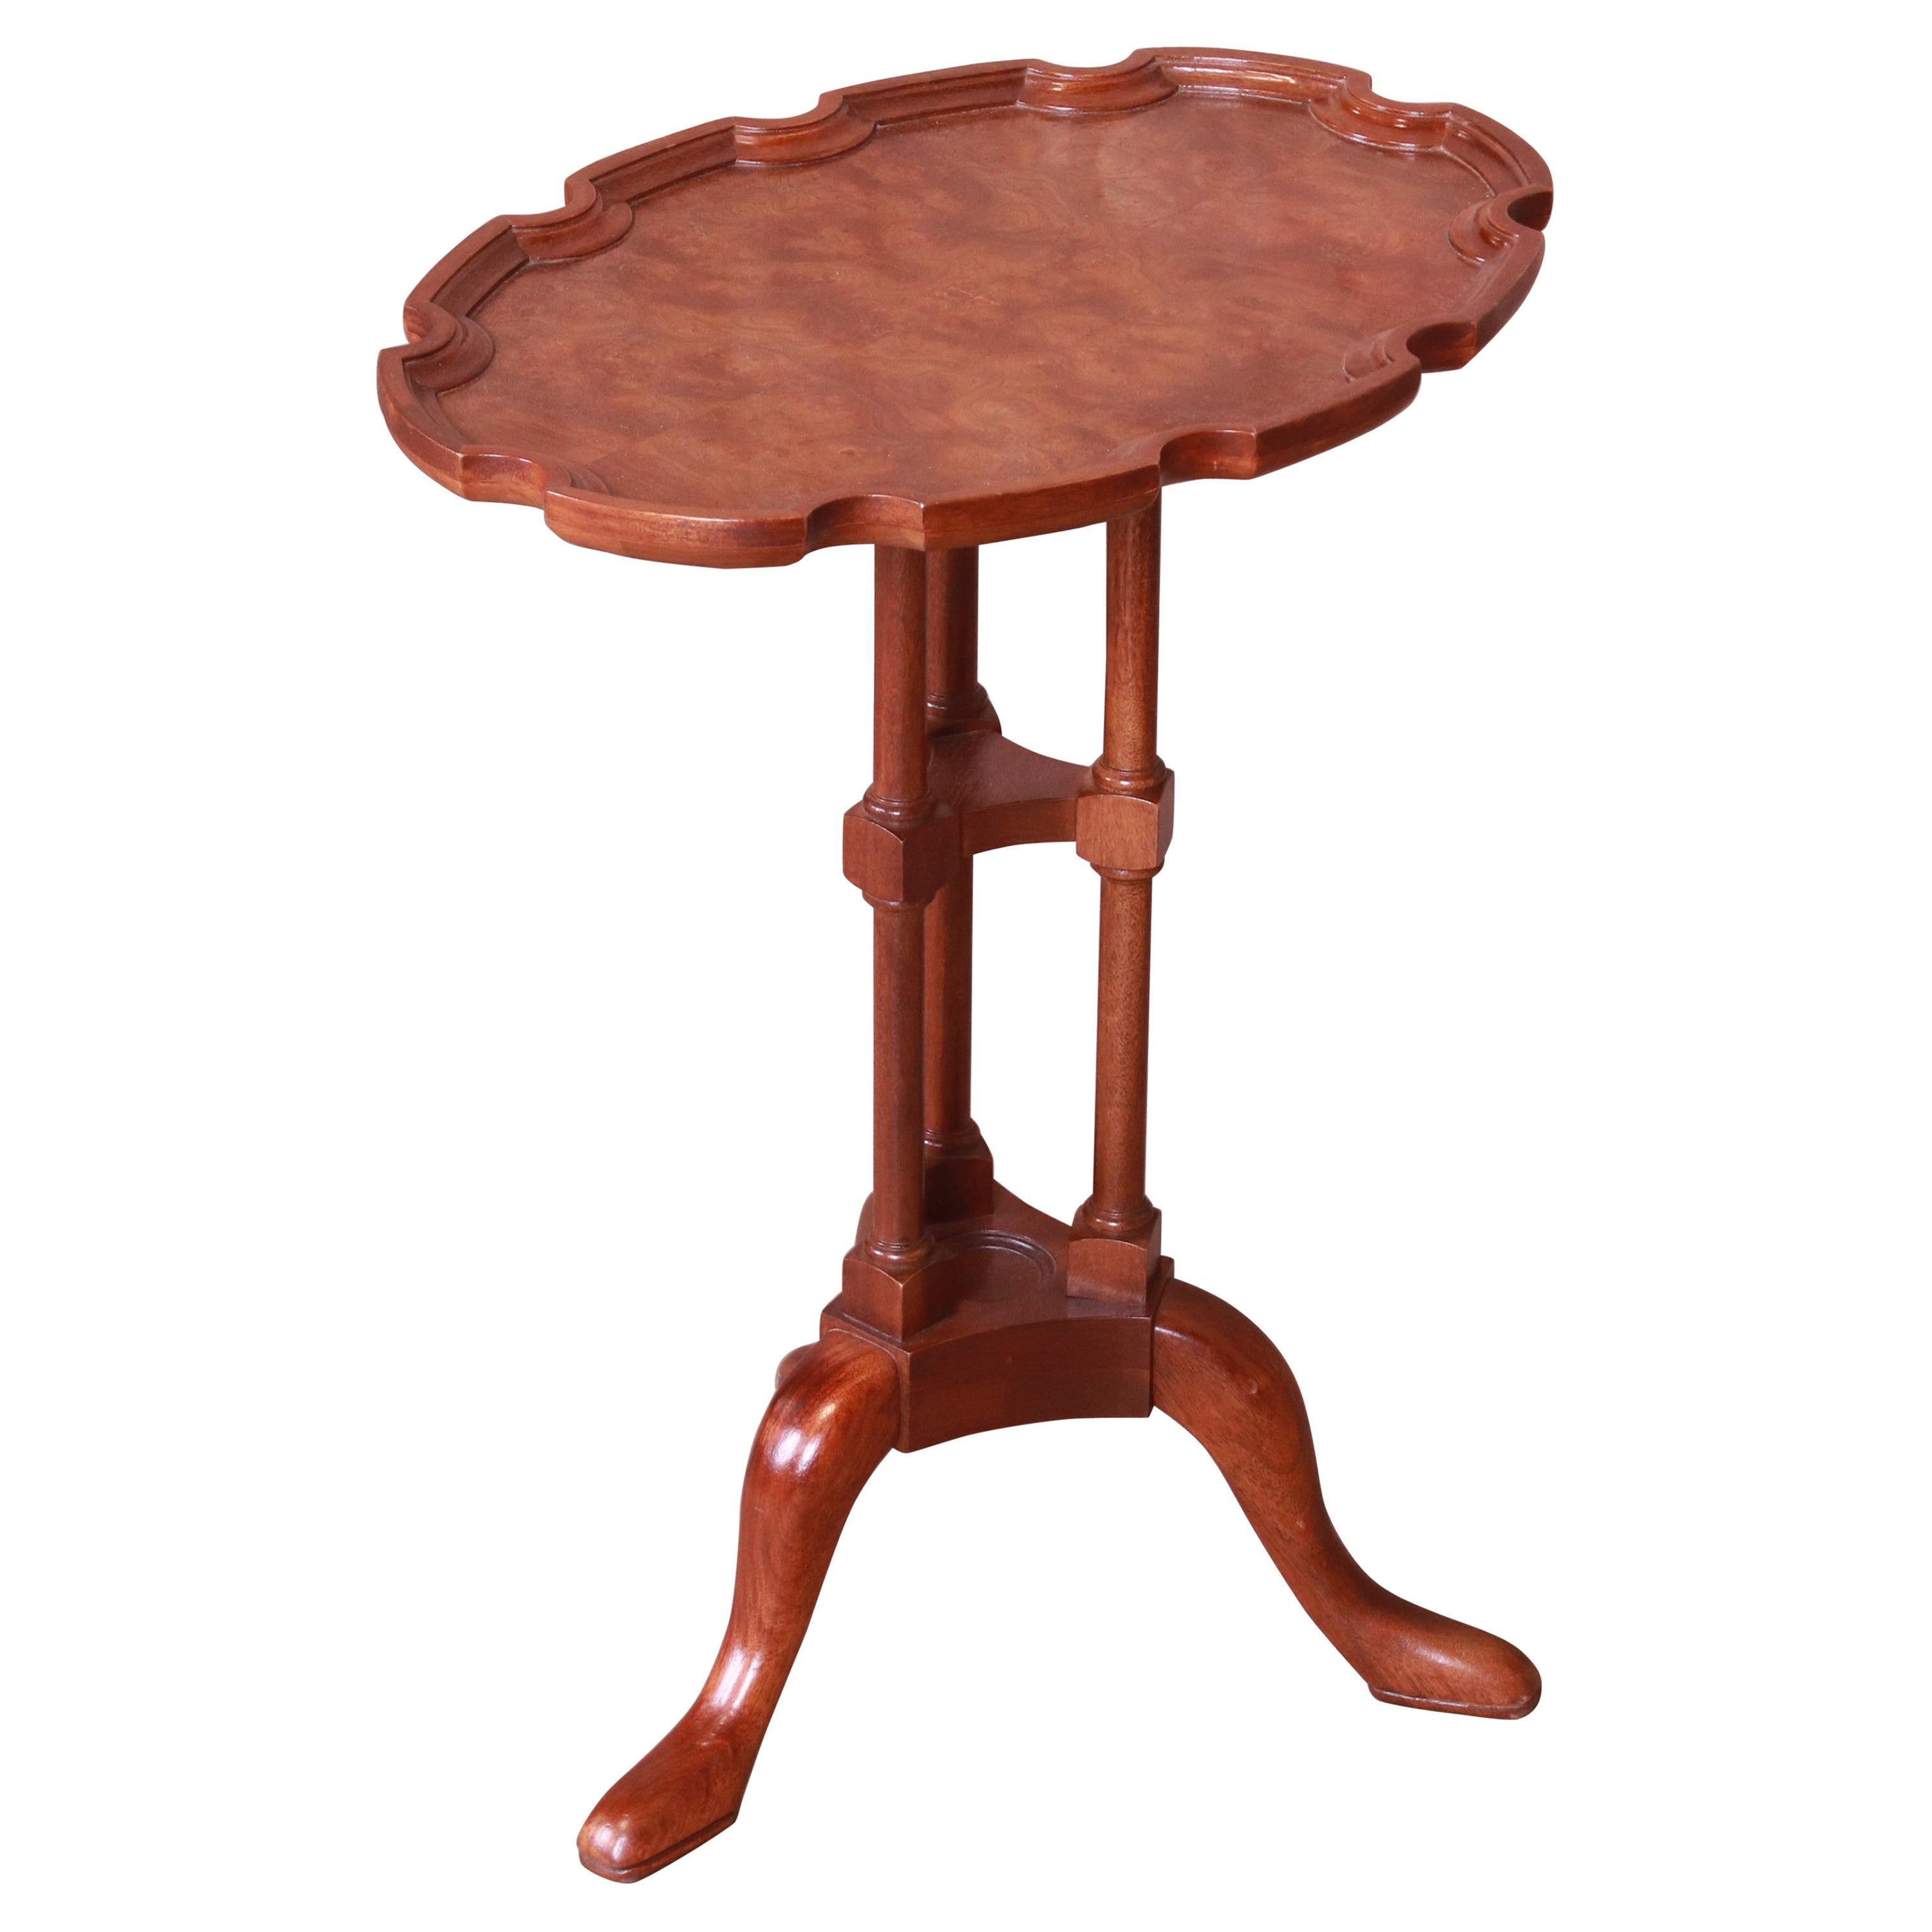 Baker Furniture Historic Charleston Queen Anne Mahogany and Burl Wood Tea Table